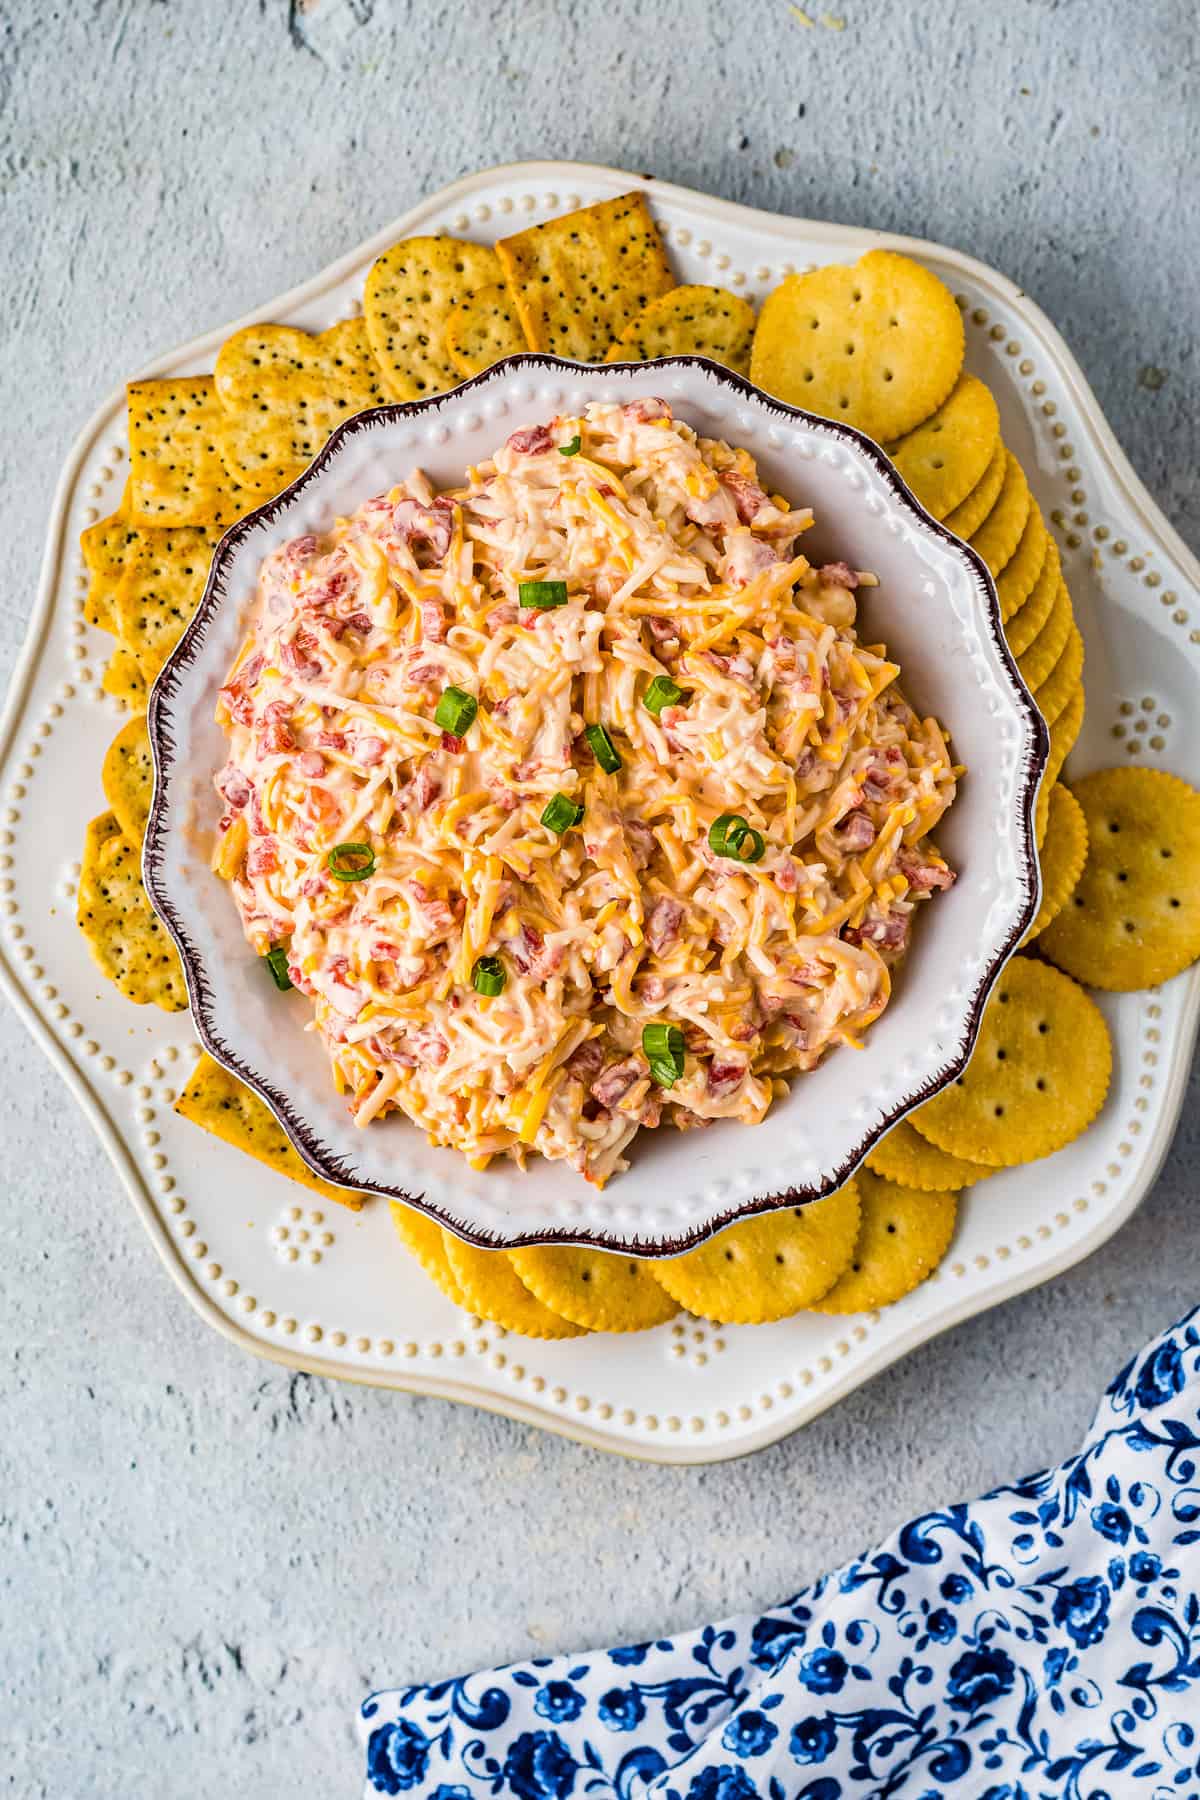 Overhead image of pimento cheese in bowl with crackers on plate